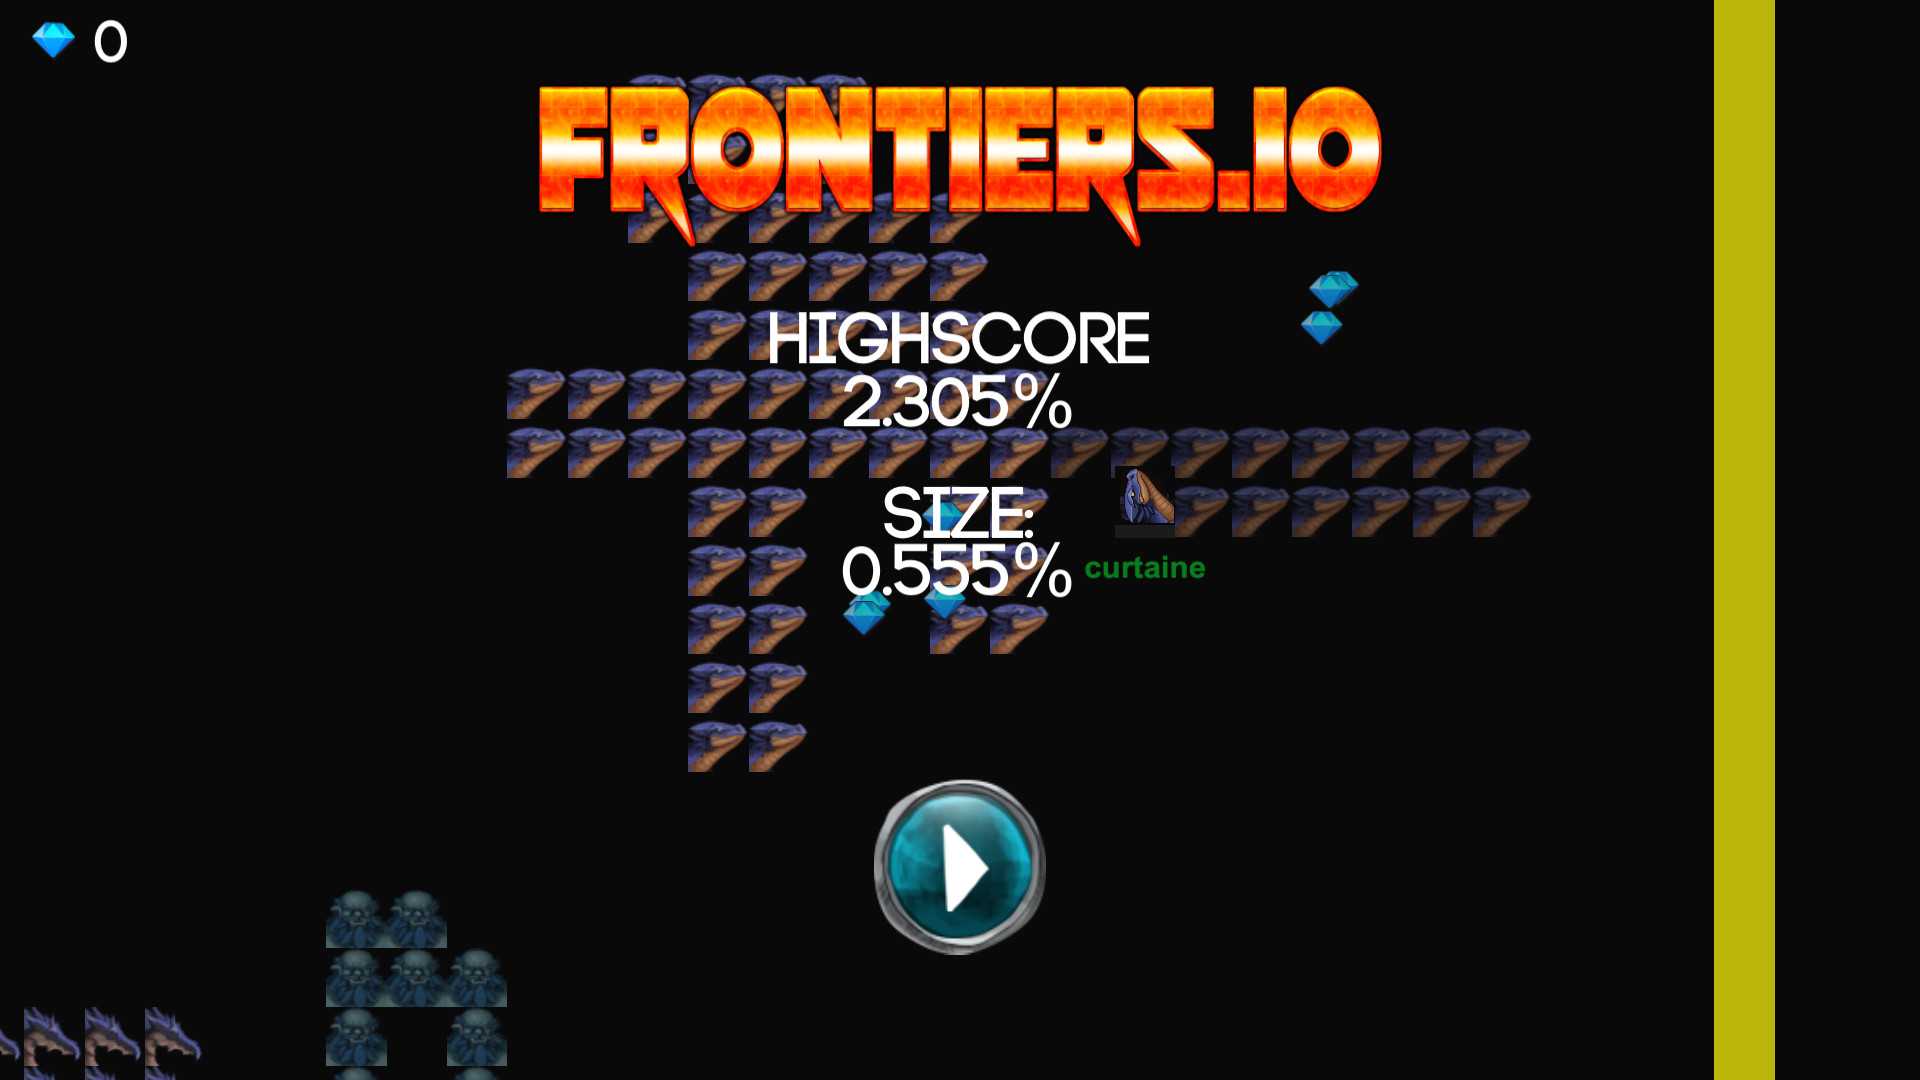 Frontiers.io - Expansion Pack 3 screenshot